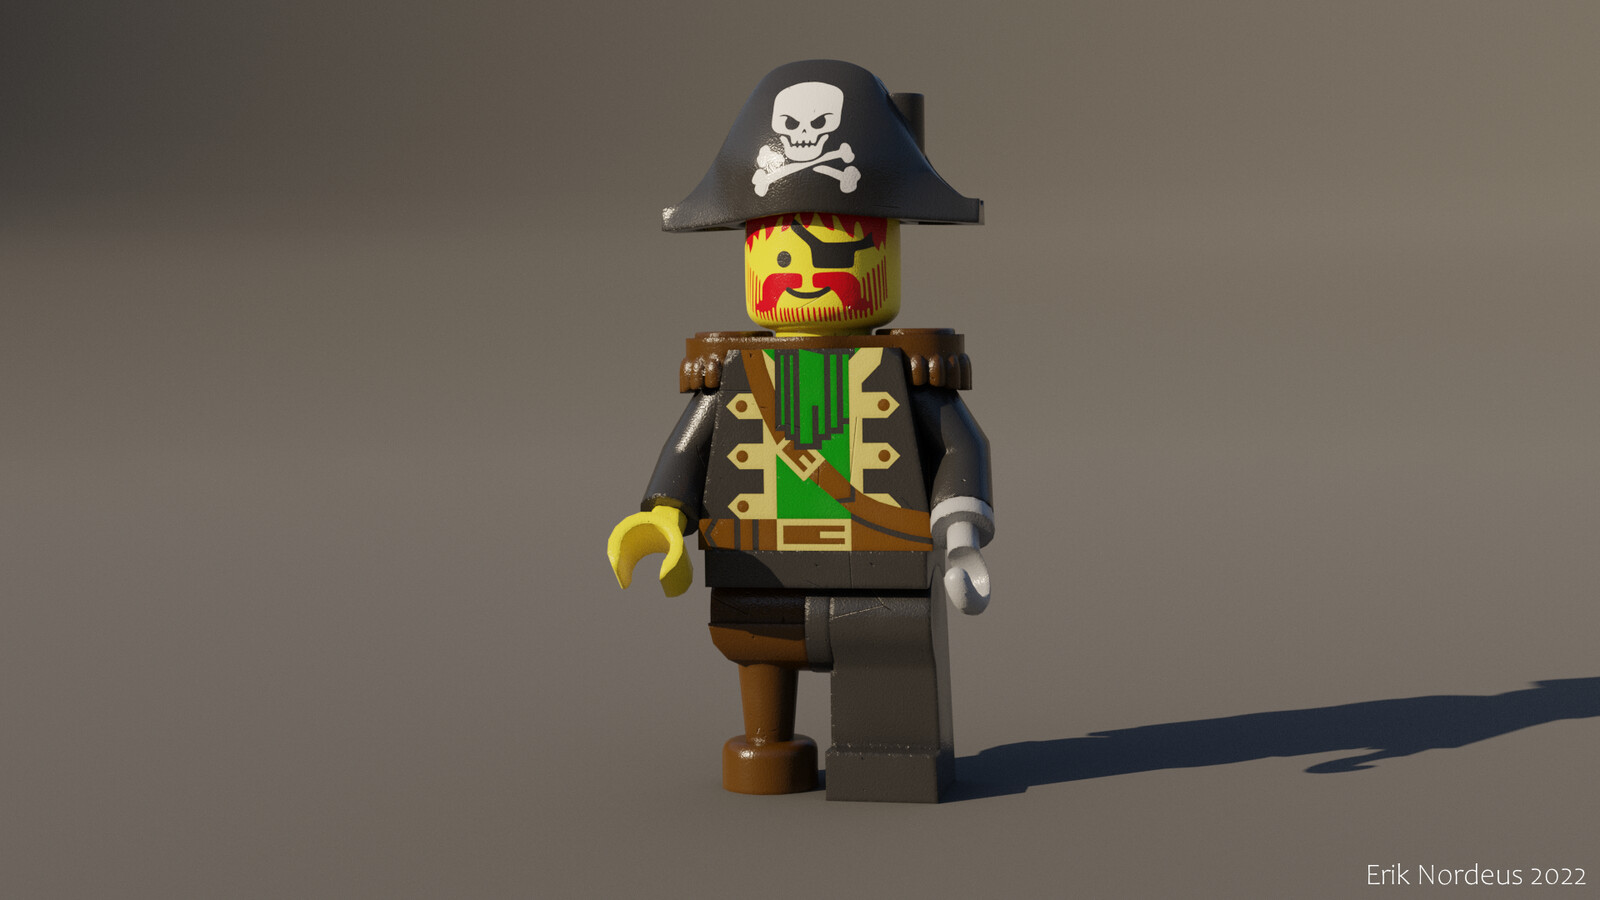 Experiments to make a realistic LEGO pirate character in Blender. You can download the material here: https://habrador.itch.io/blender-lego-material